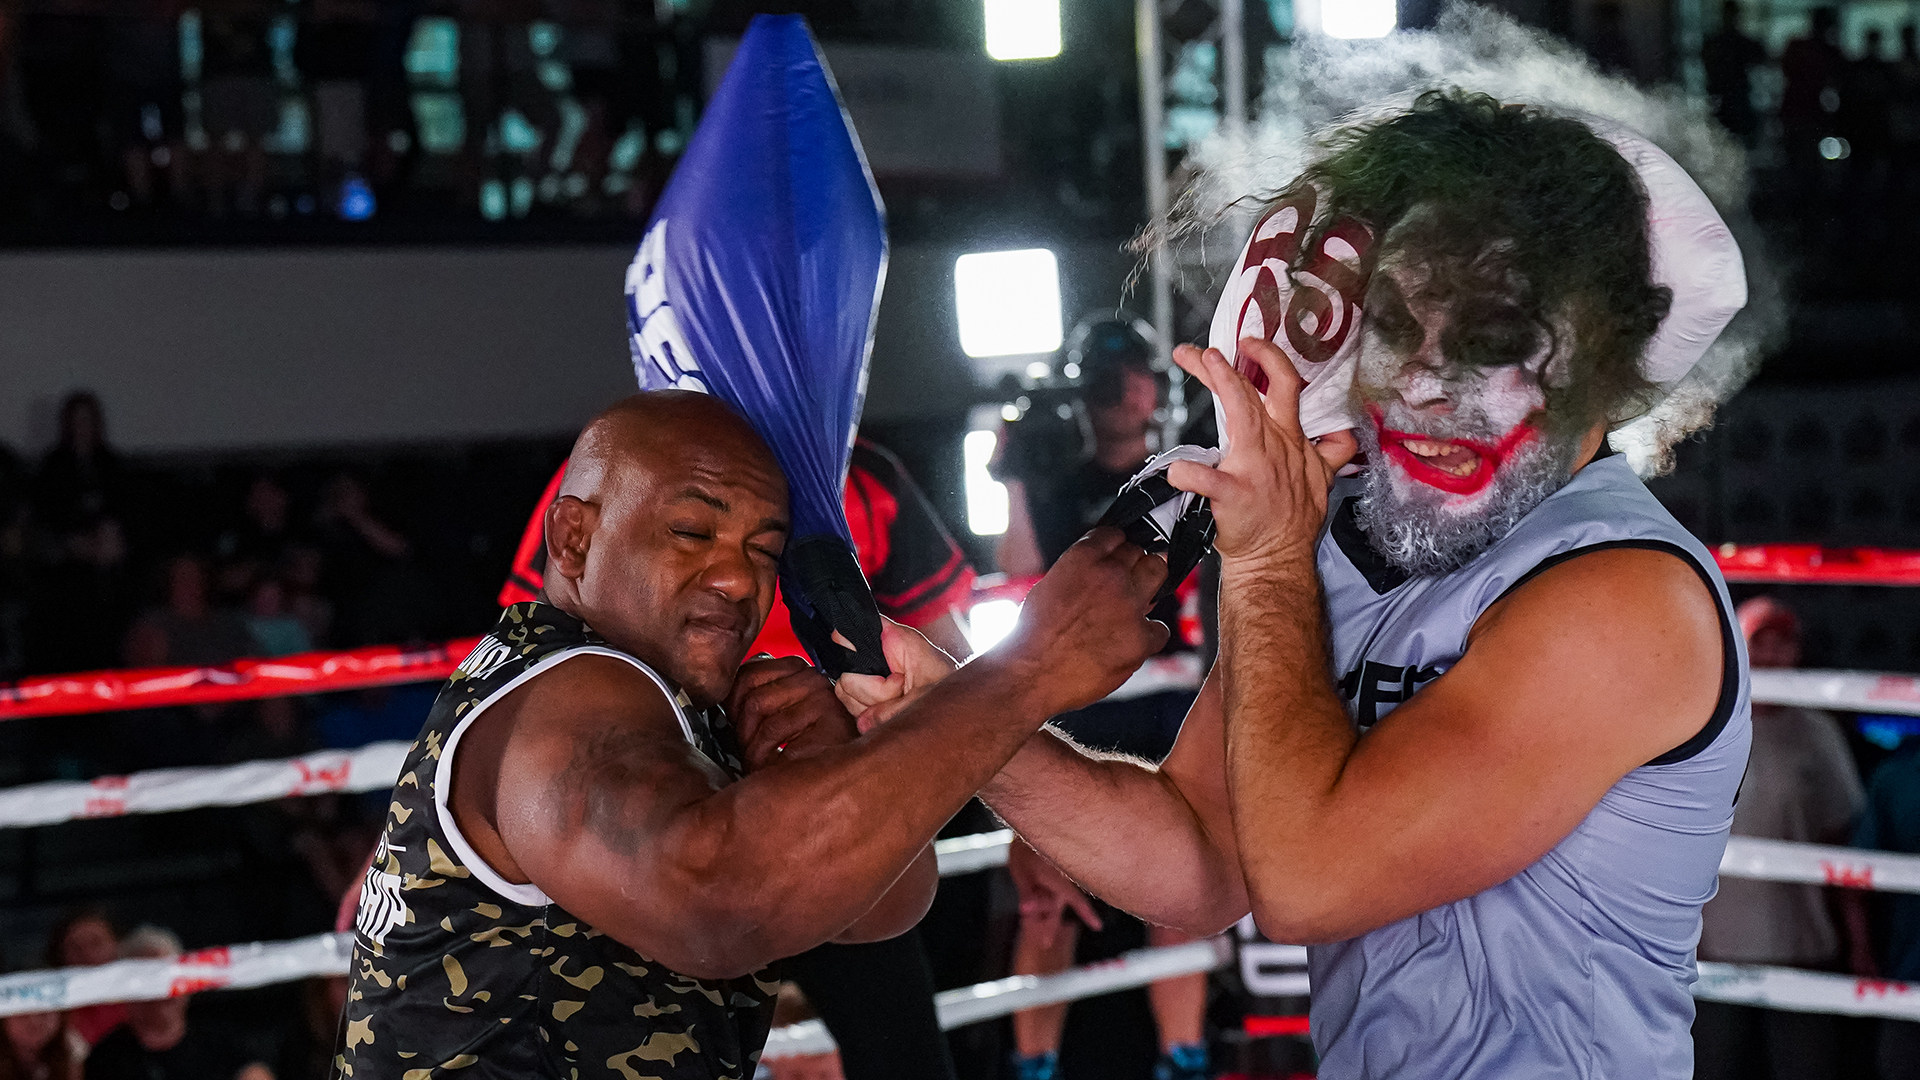 Two competitors battle it out during the PFC’s televised event on ESPN. Photo: PFC